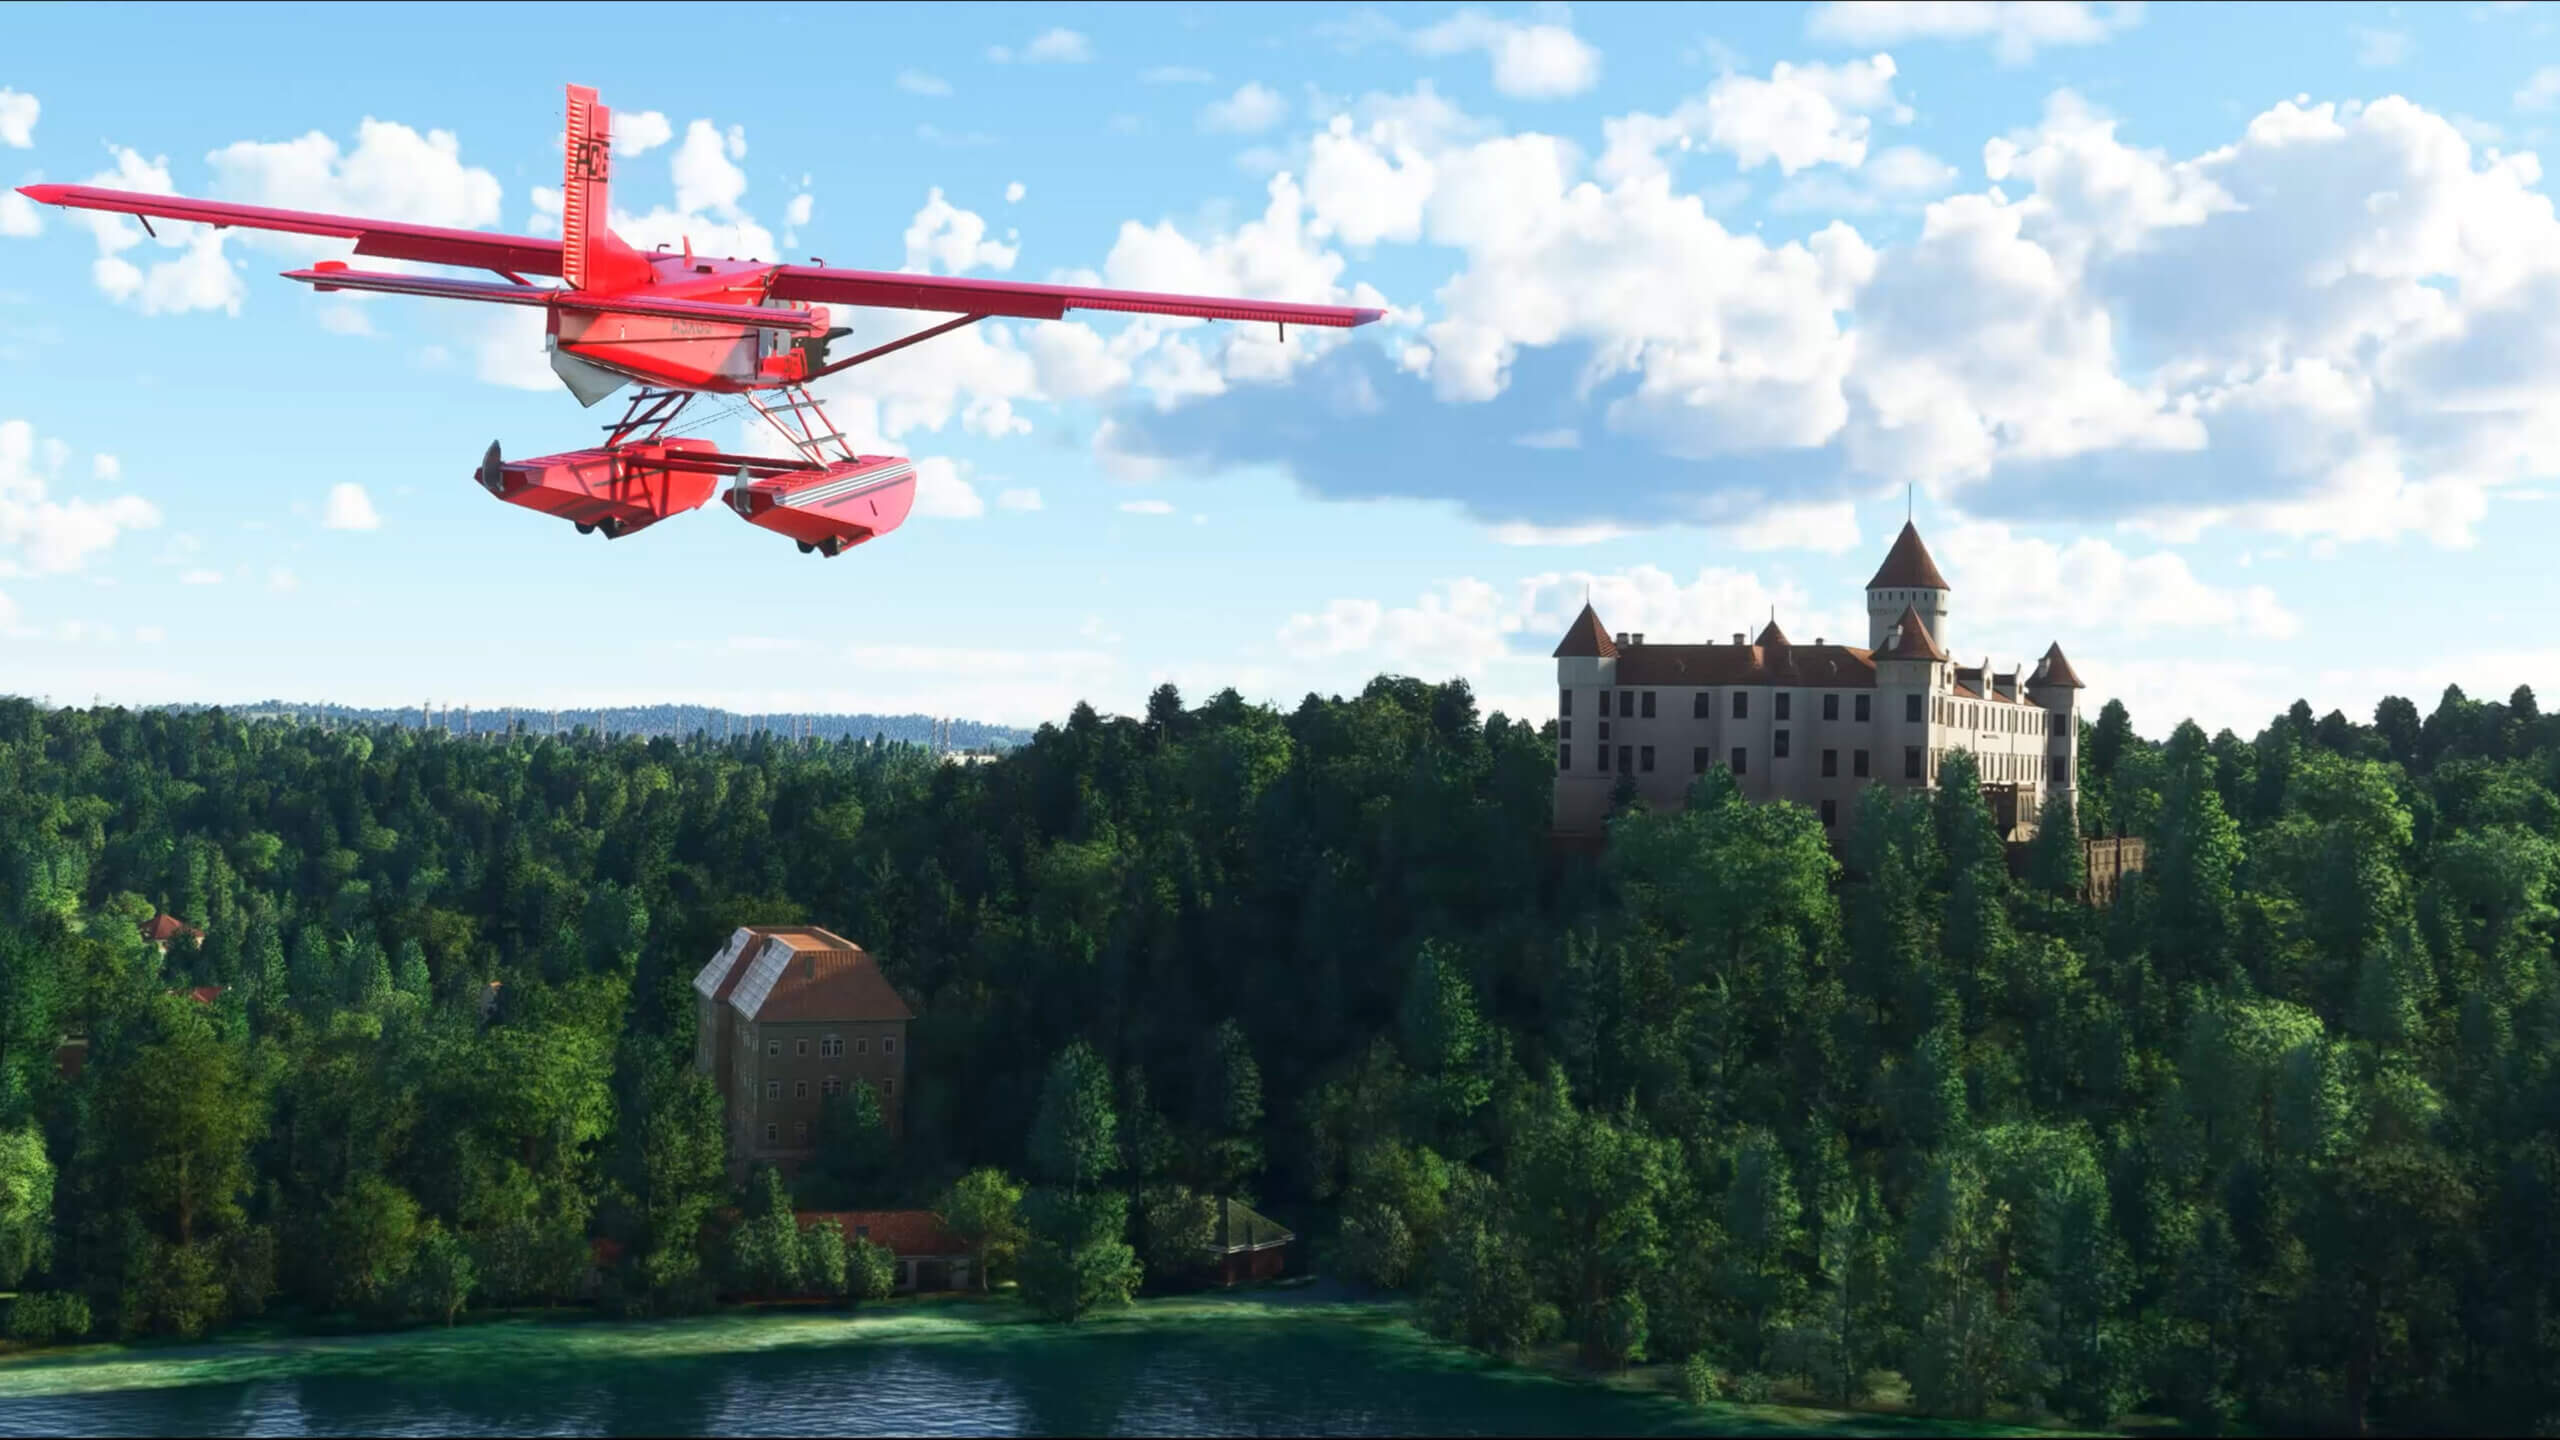 A prop plane with floats and a red livery flies over a castle in Eastern Central Europe